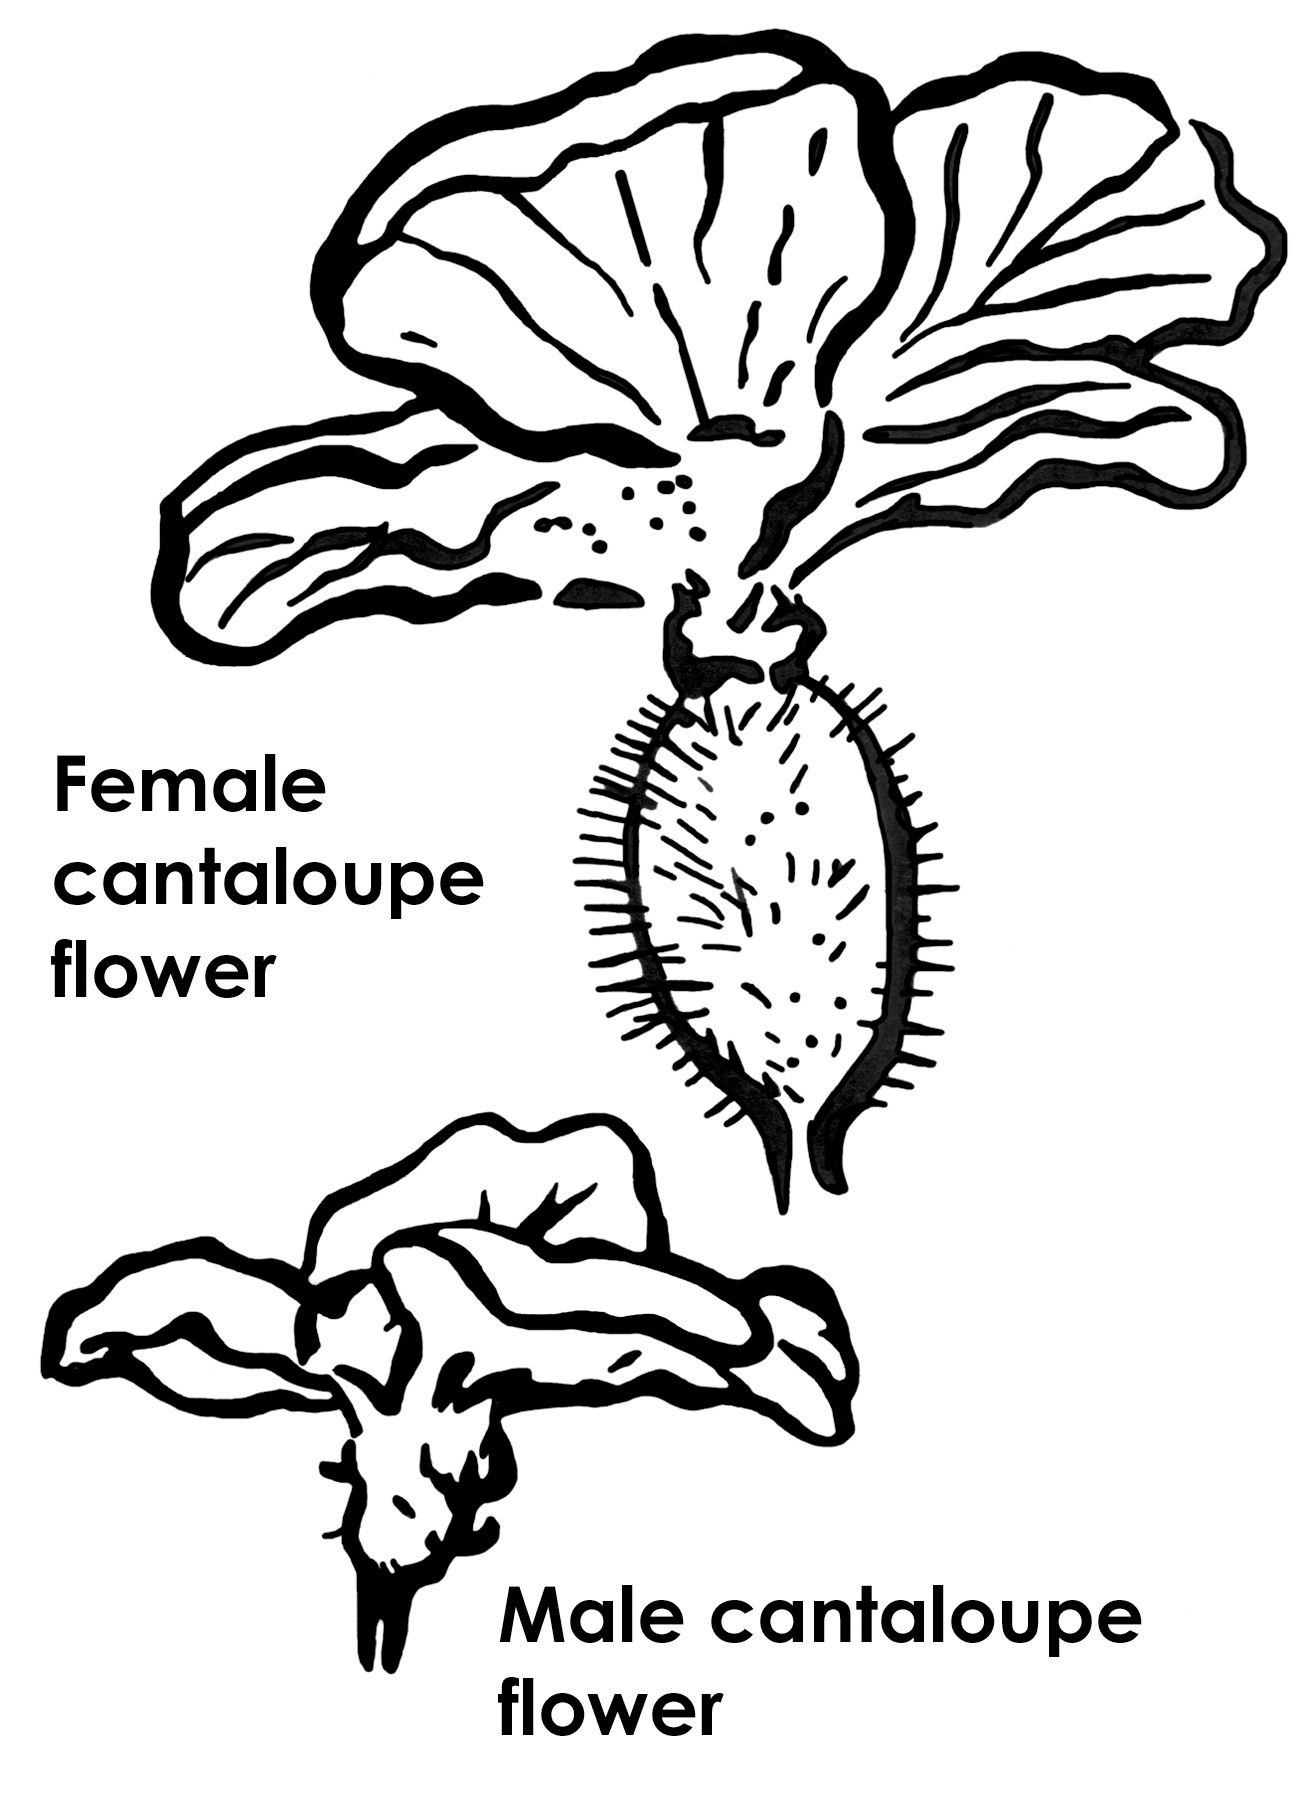 Female and male canteloupe flowers